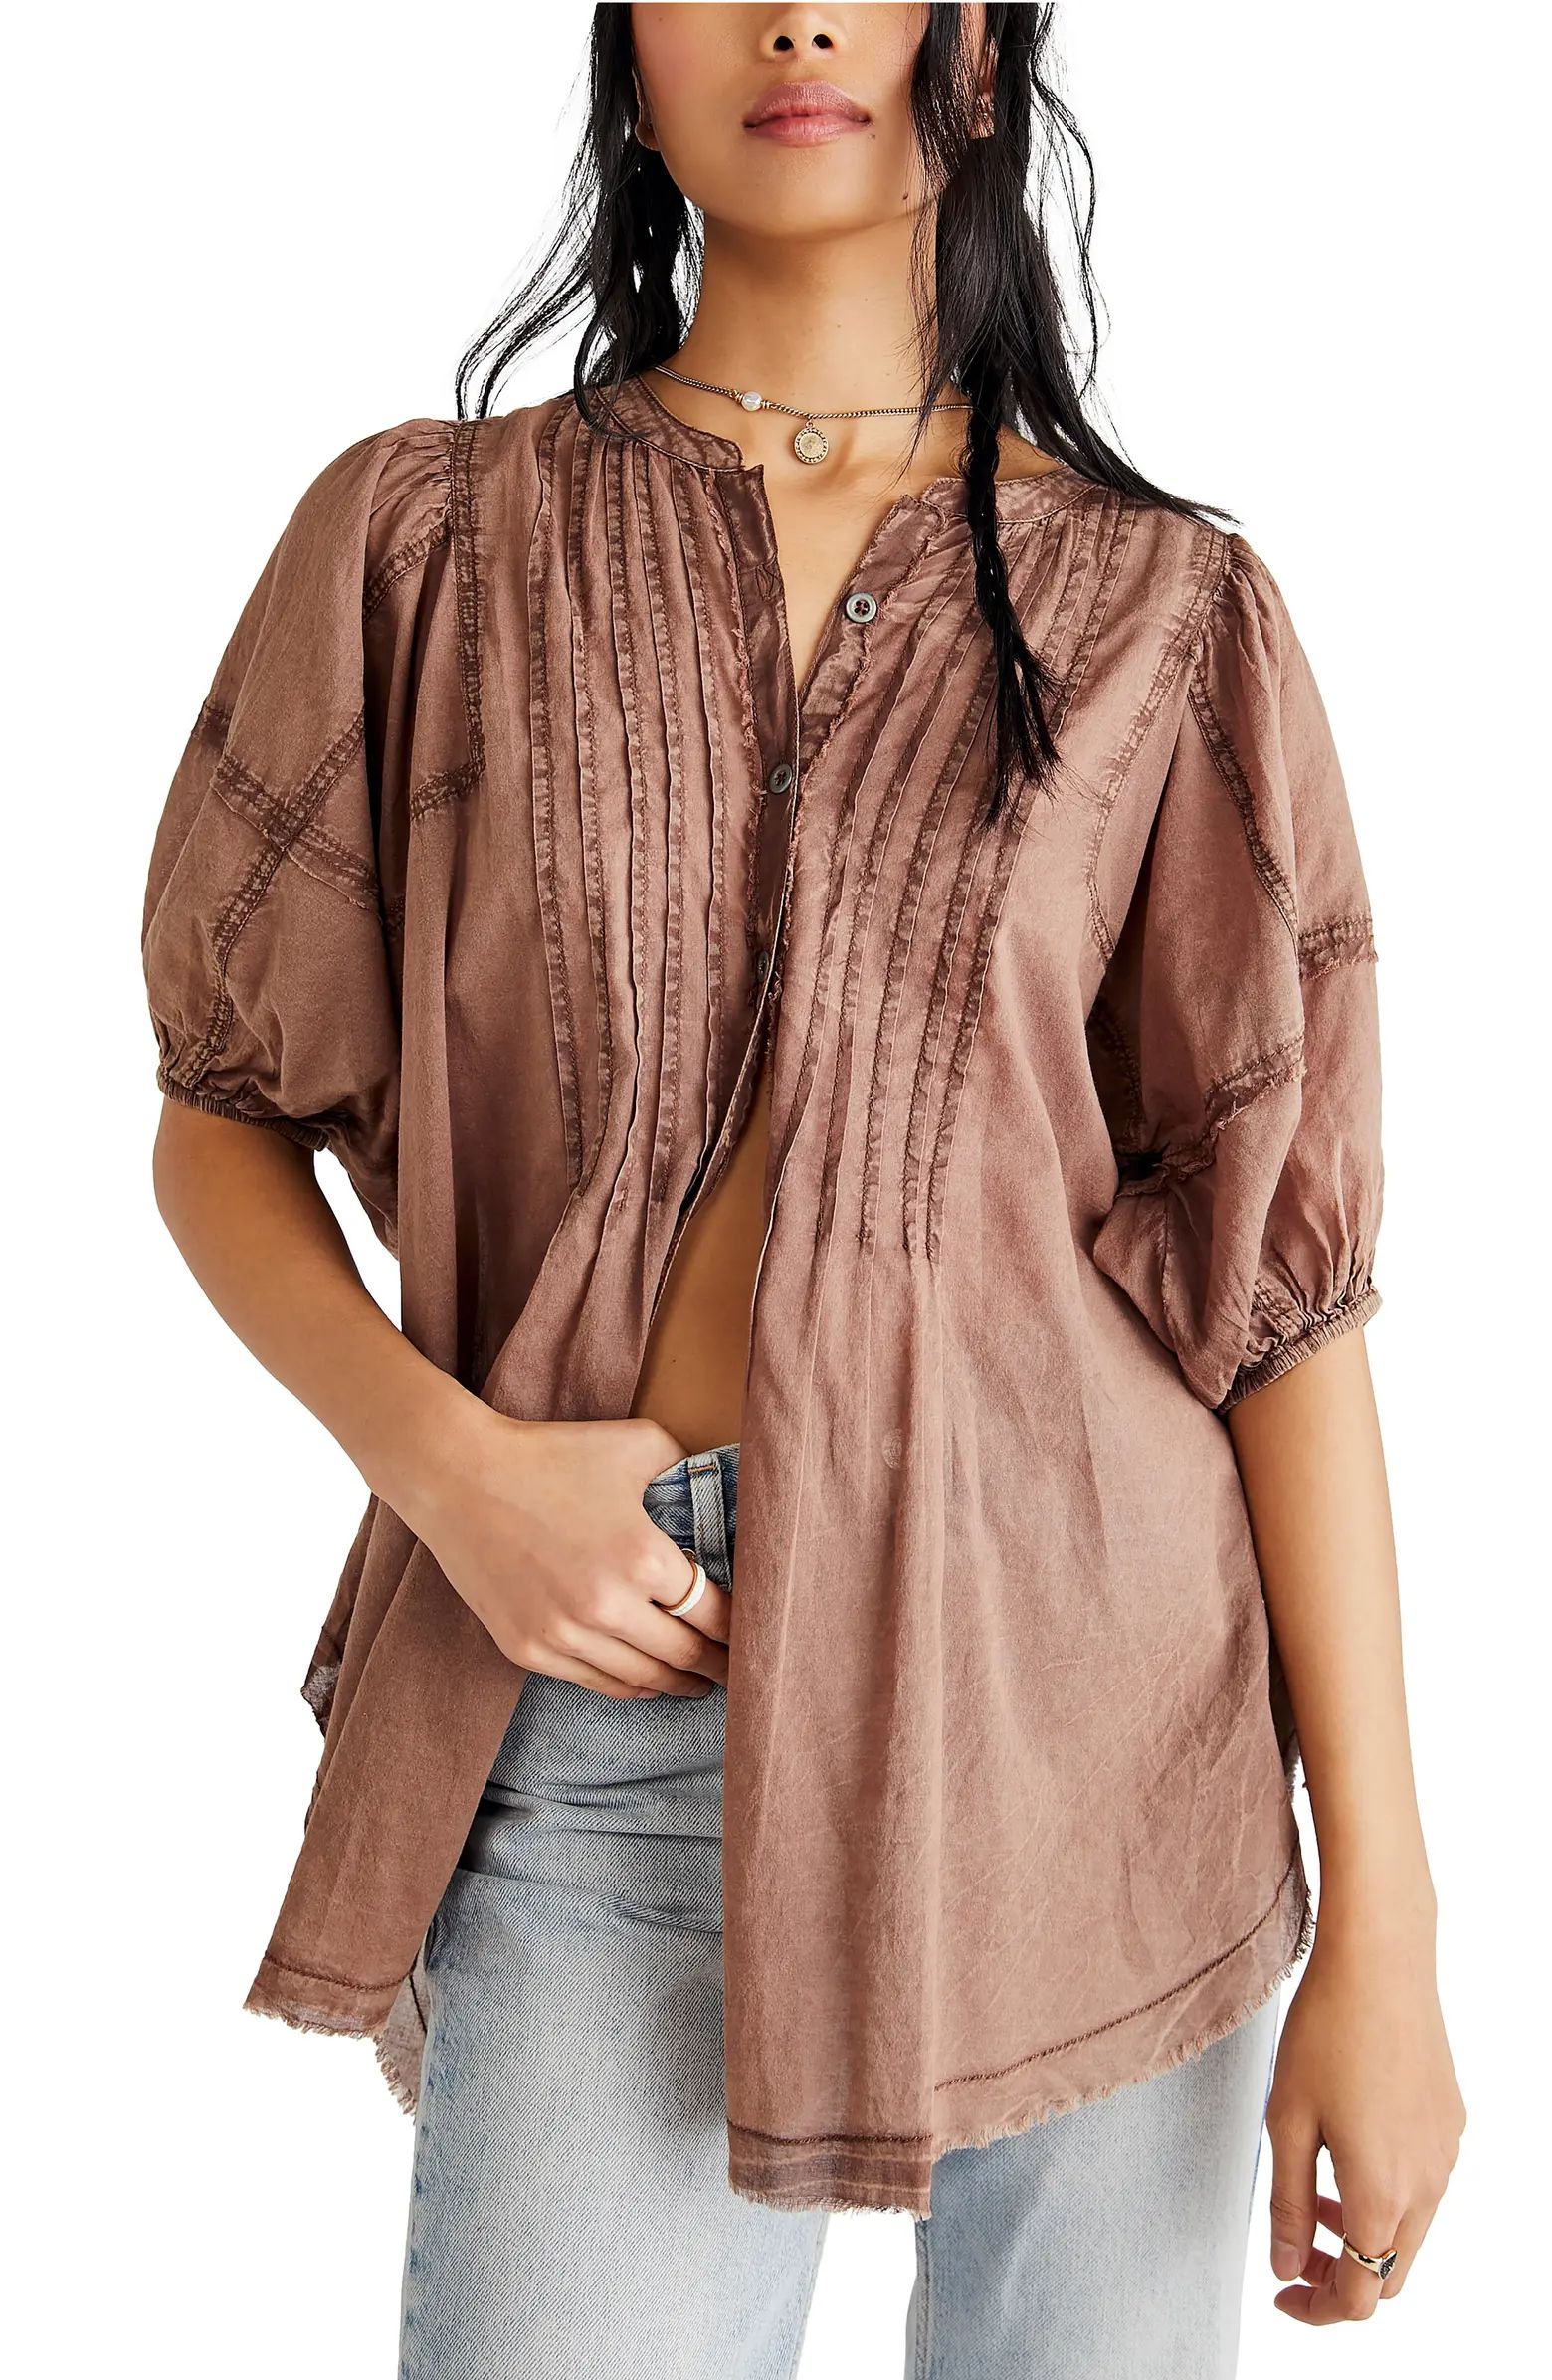 Something Sweet Cotton Tunic Top | Nordstrom